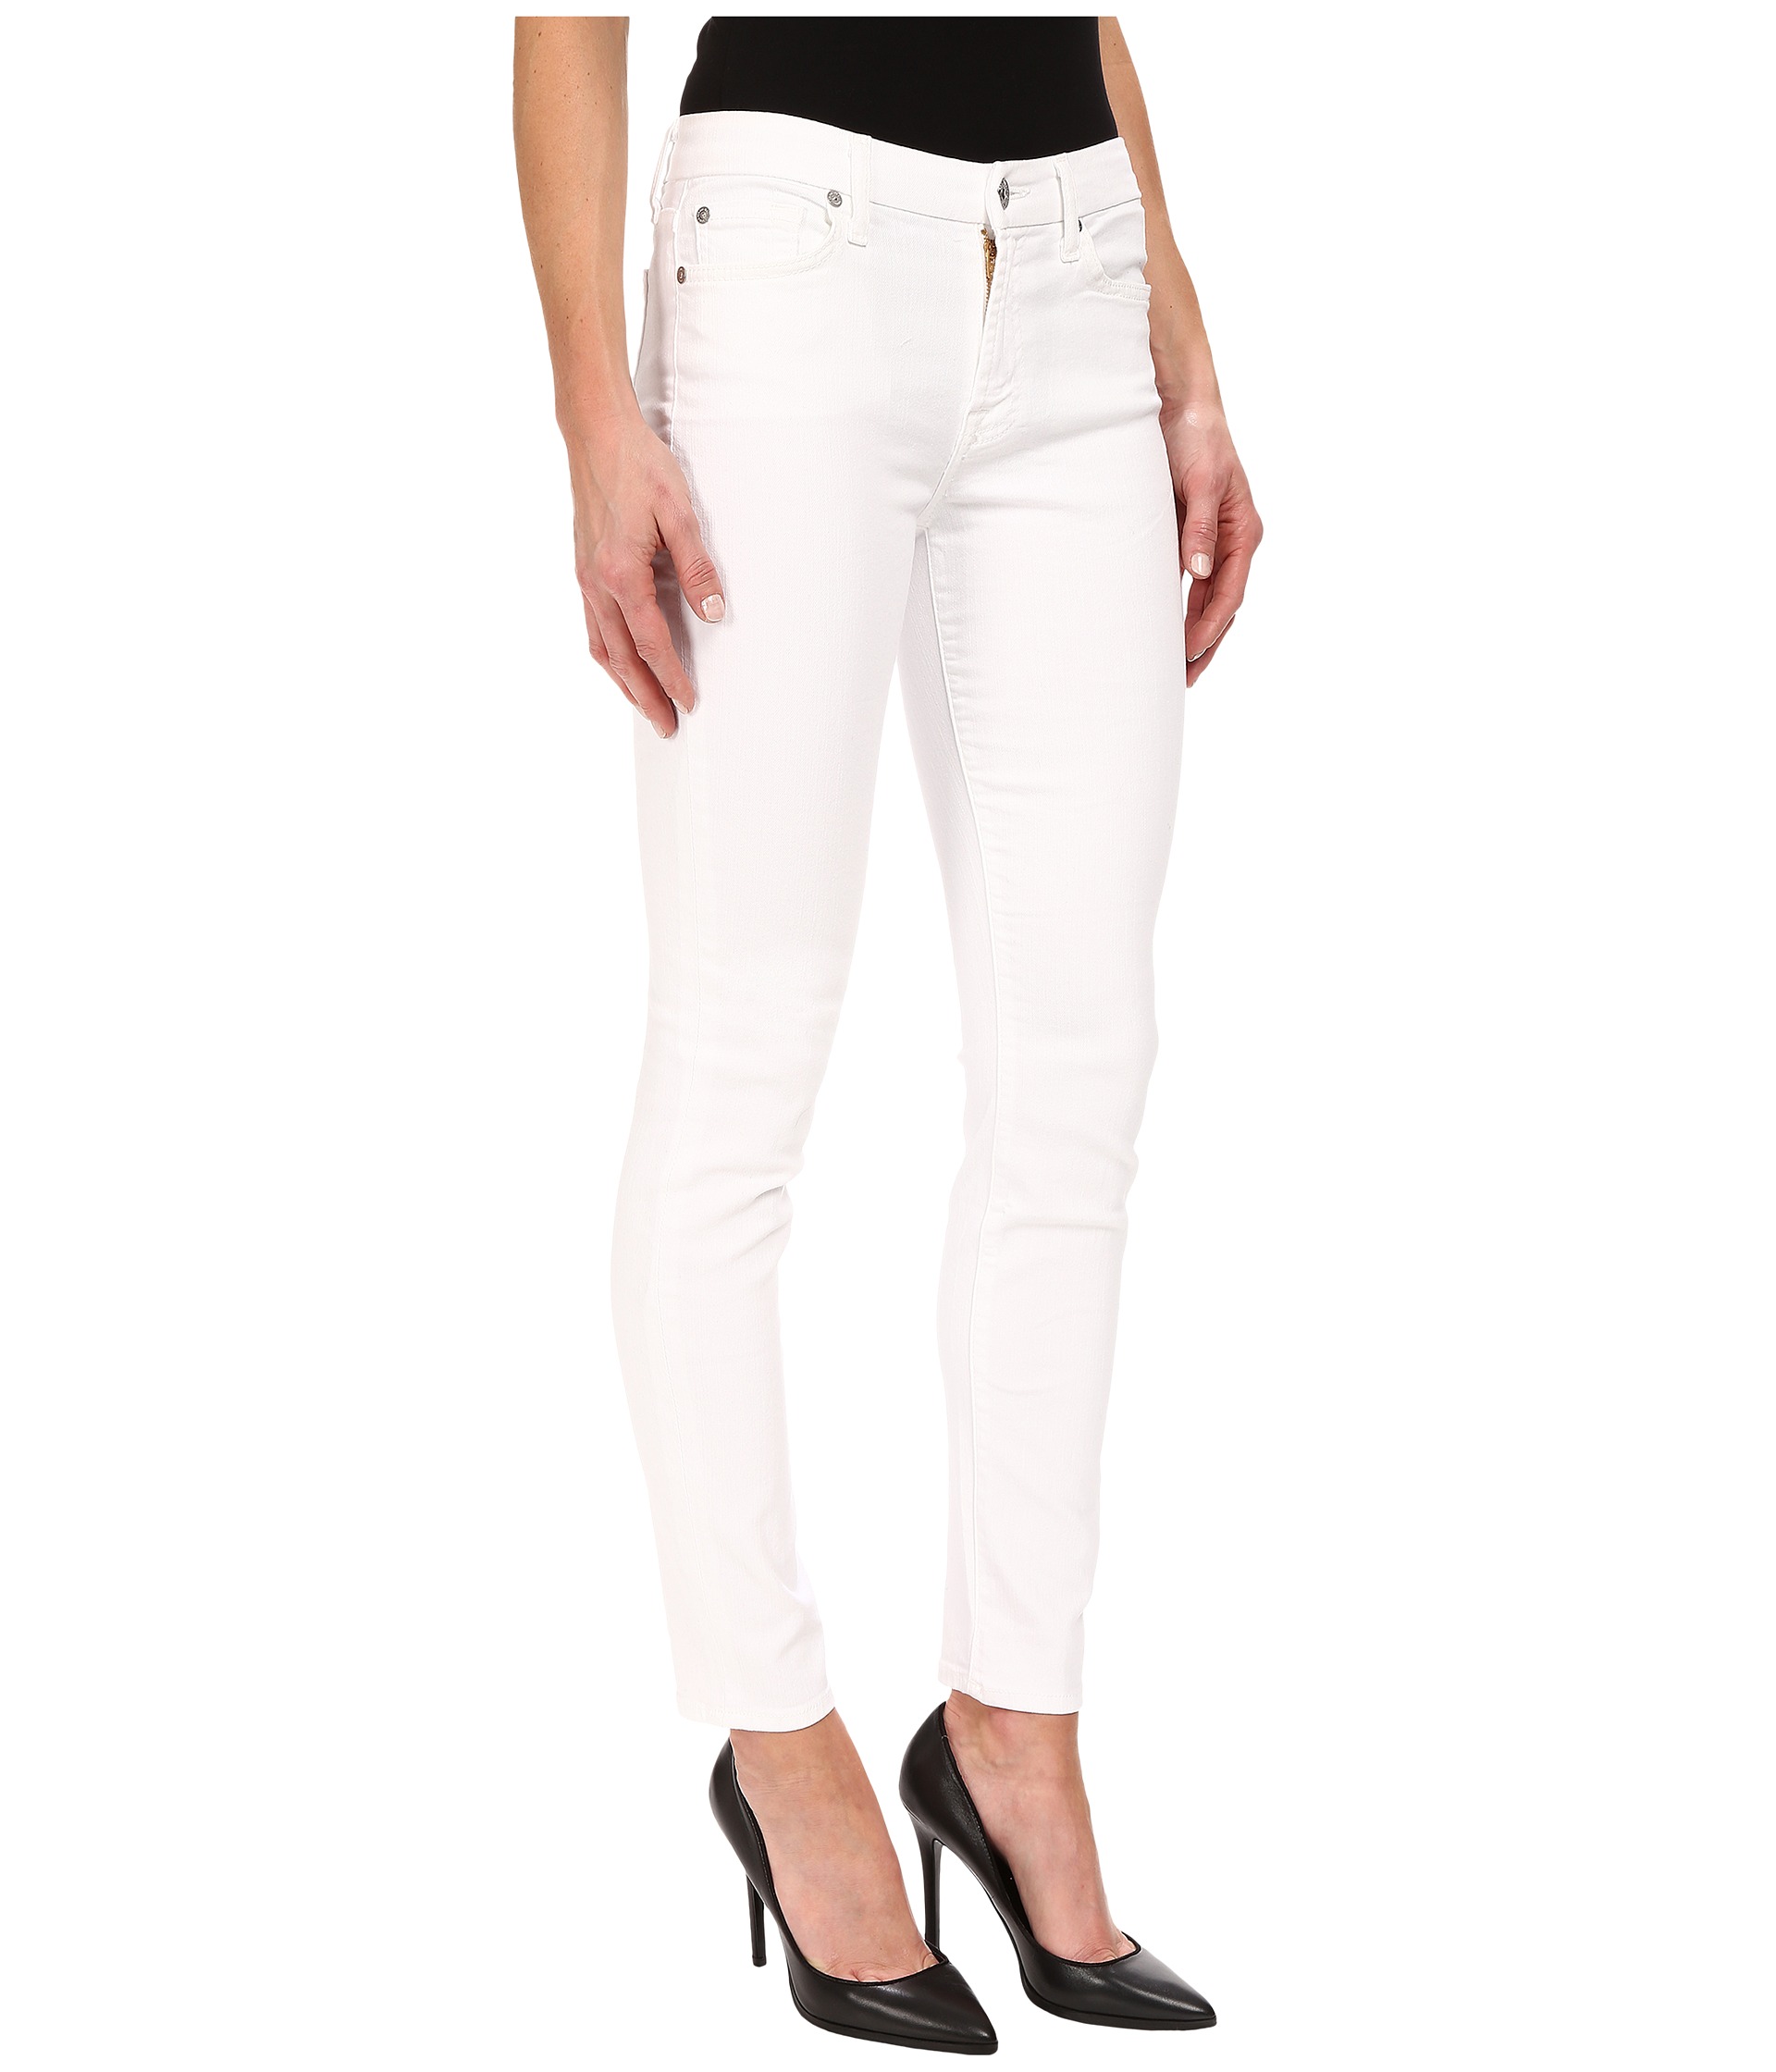 7 For All Mankind The Skinny in Clean White at Zappos.com